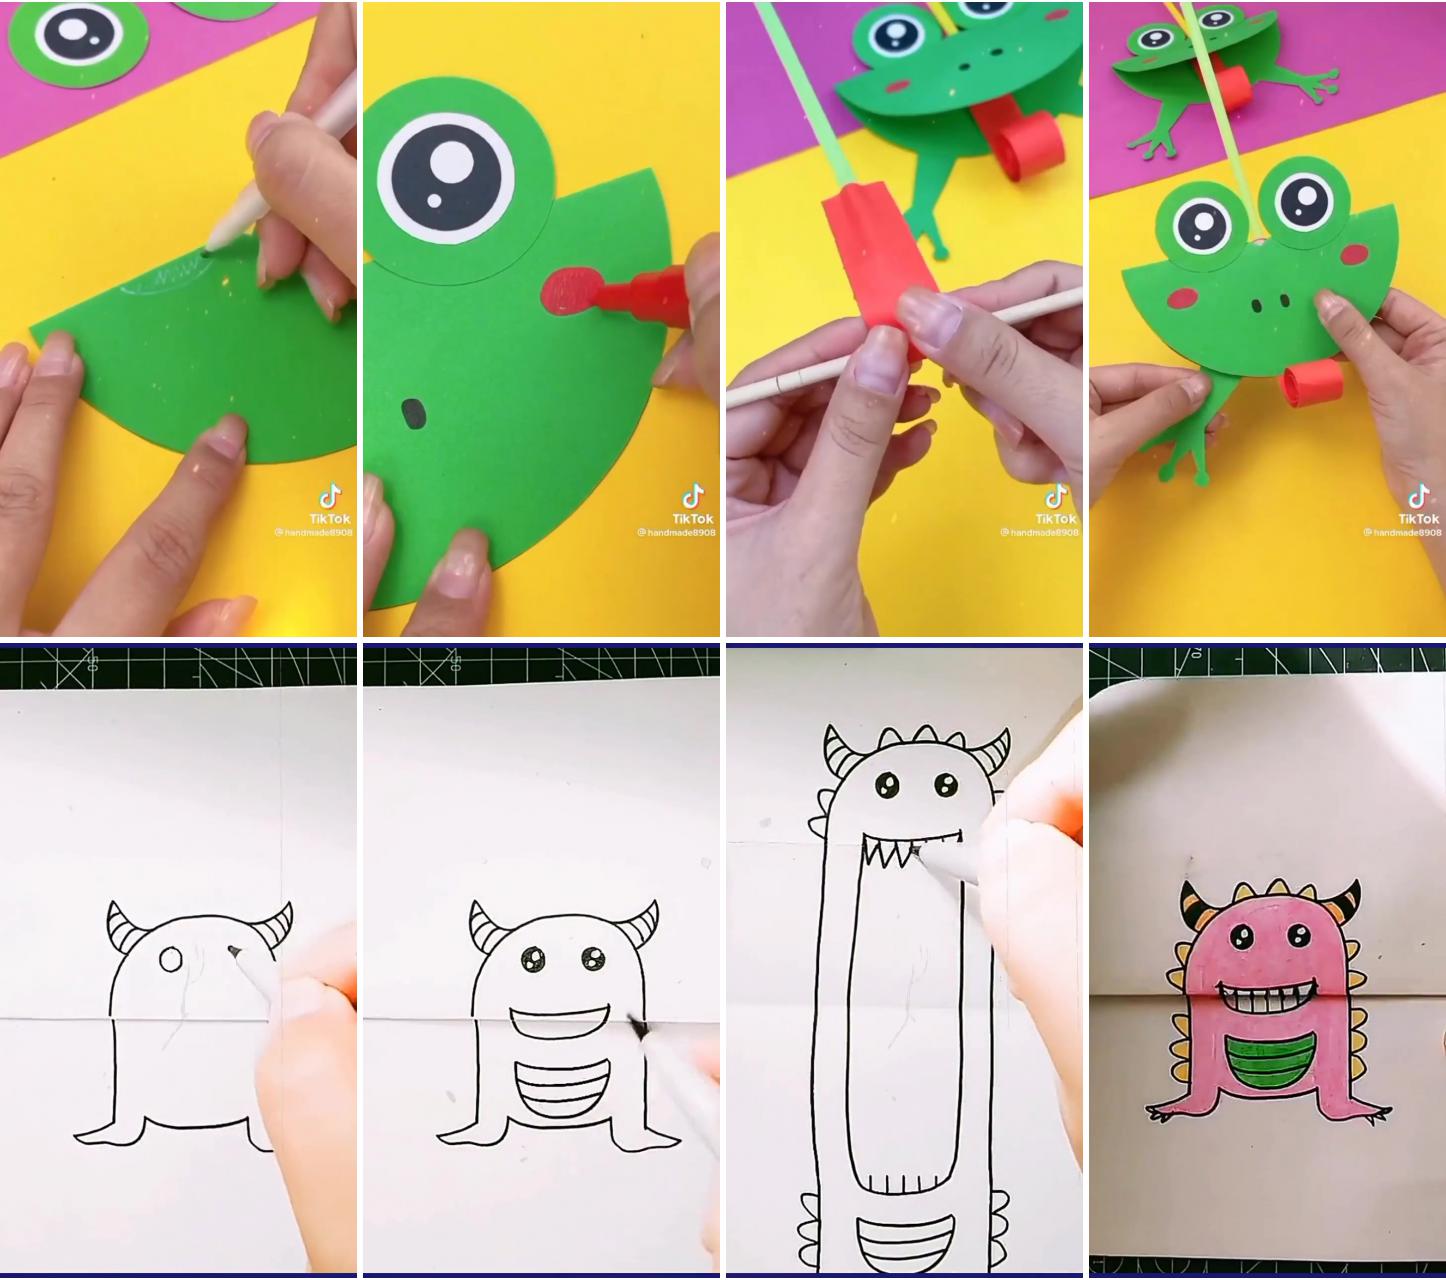 Paper frog toy | learn how to draw a monsters with this super easy step by step drawing tutorial for beginners